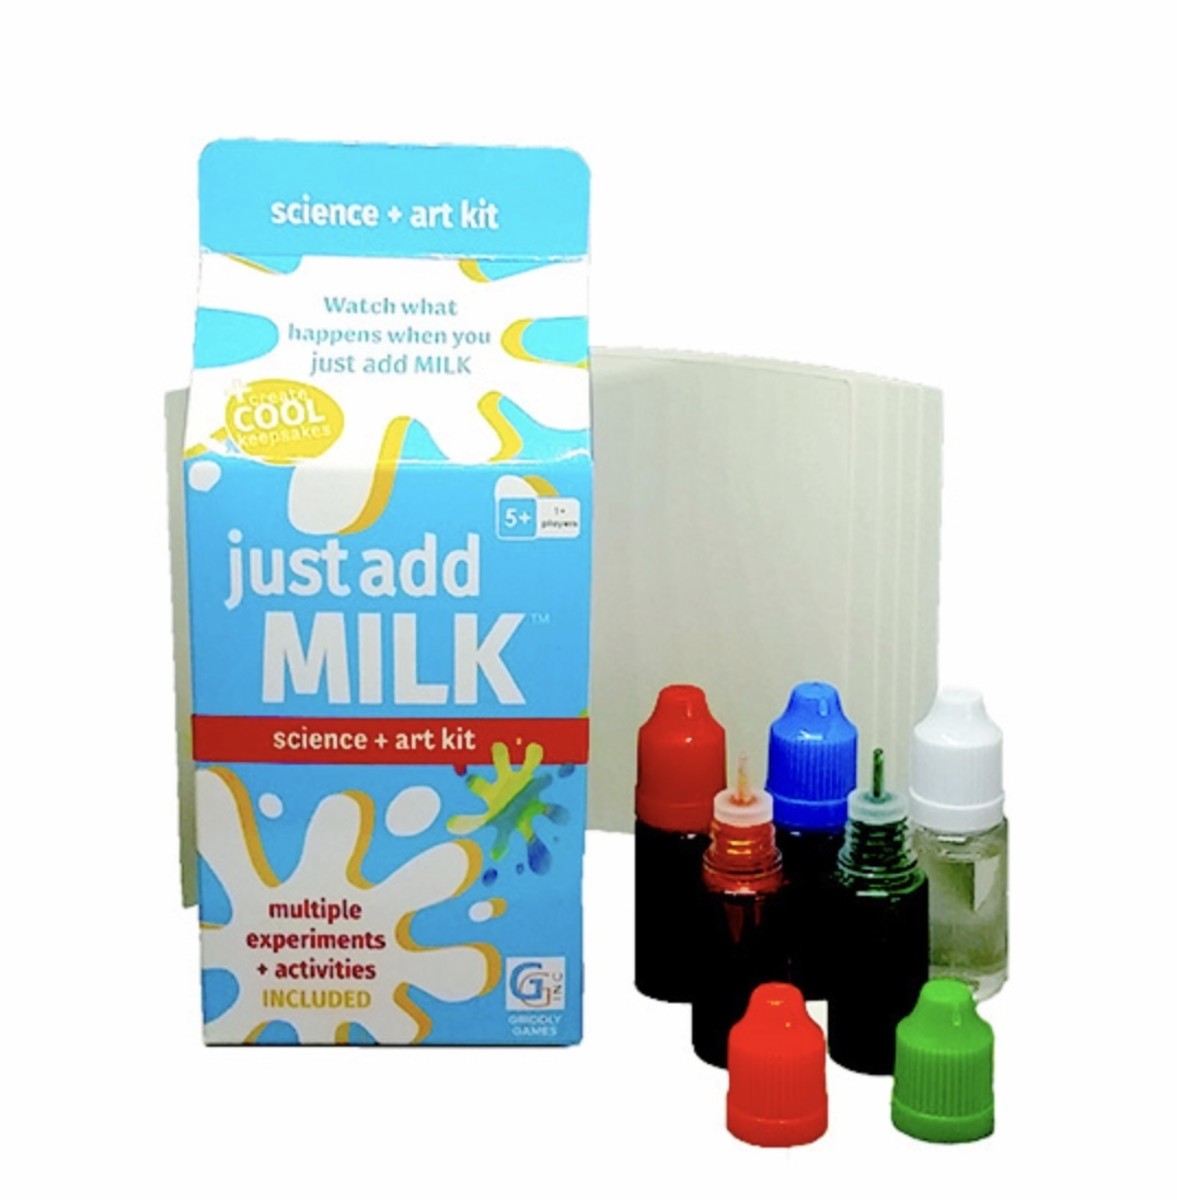 griddly-games-just-add-science-kit-series-is-just-for-kids